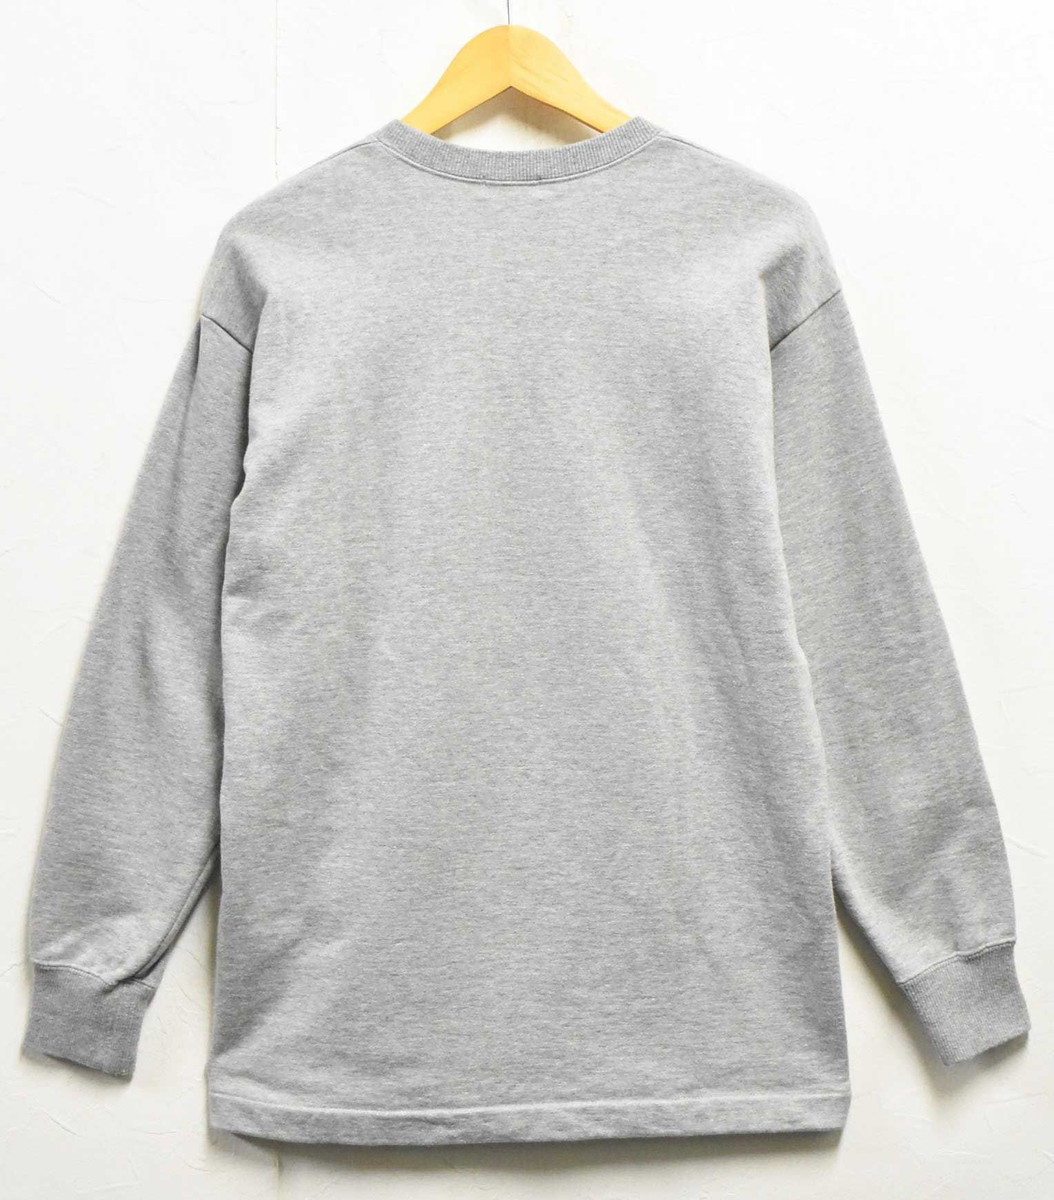  Vintage 1990 period made in Japan com *te* Garcon Homme pull over sweat Heather gray men's M corresponding (32298